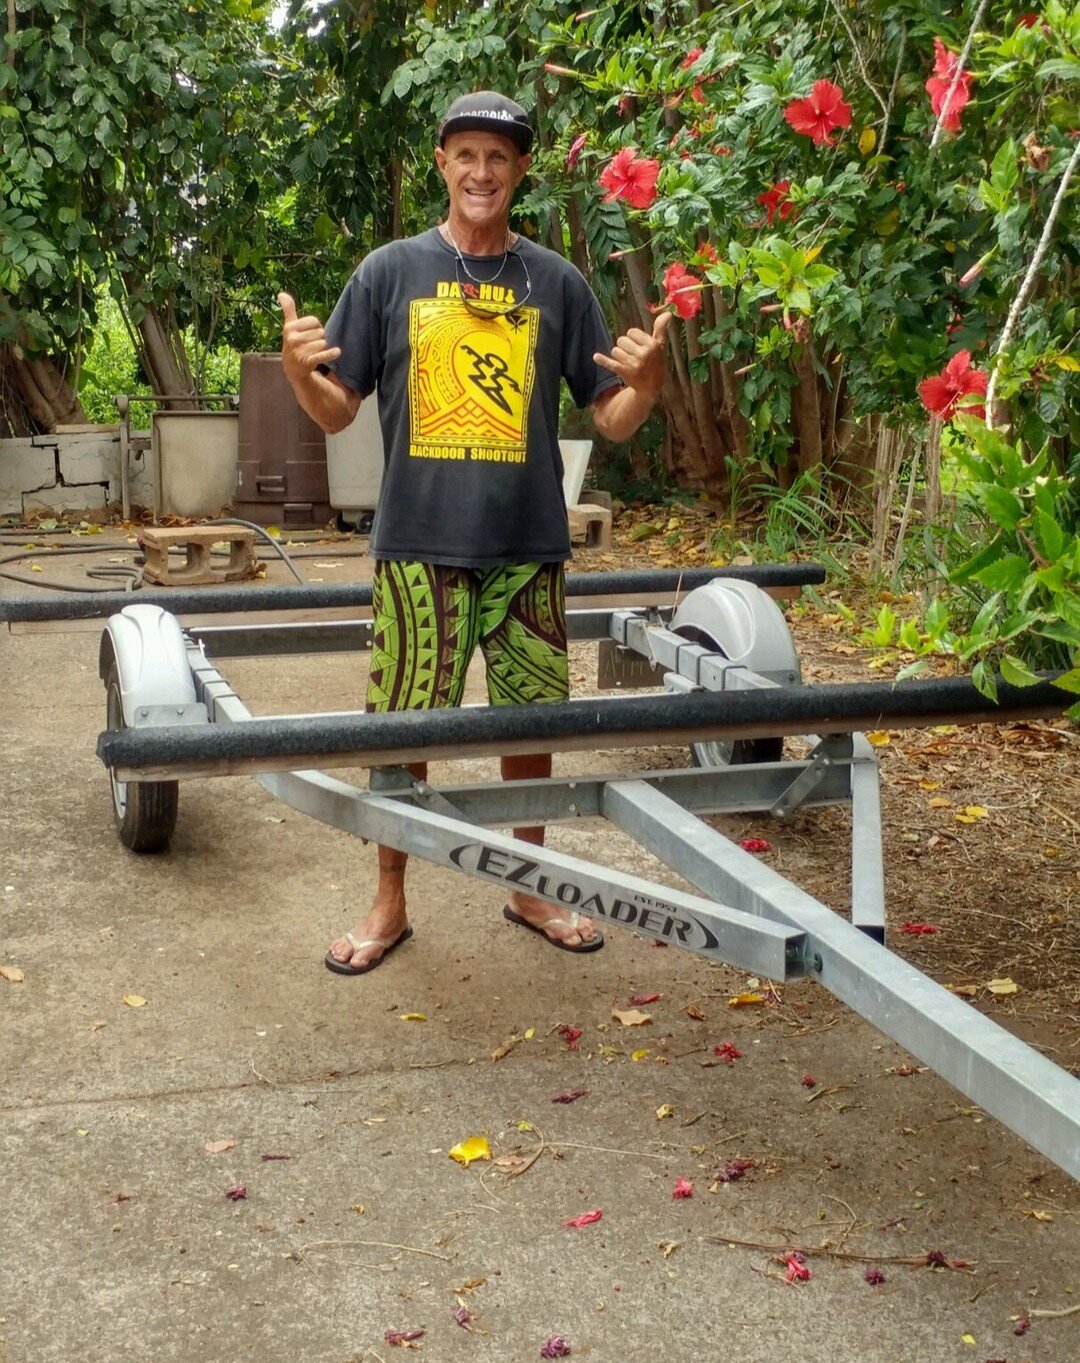 Kapena (captain) Timi with our purchased trailer! Mahalo to all who helped spread the word and donated!!